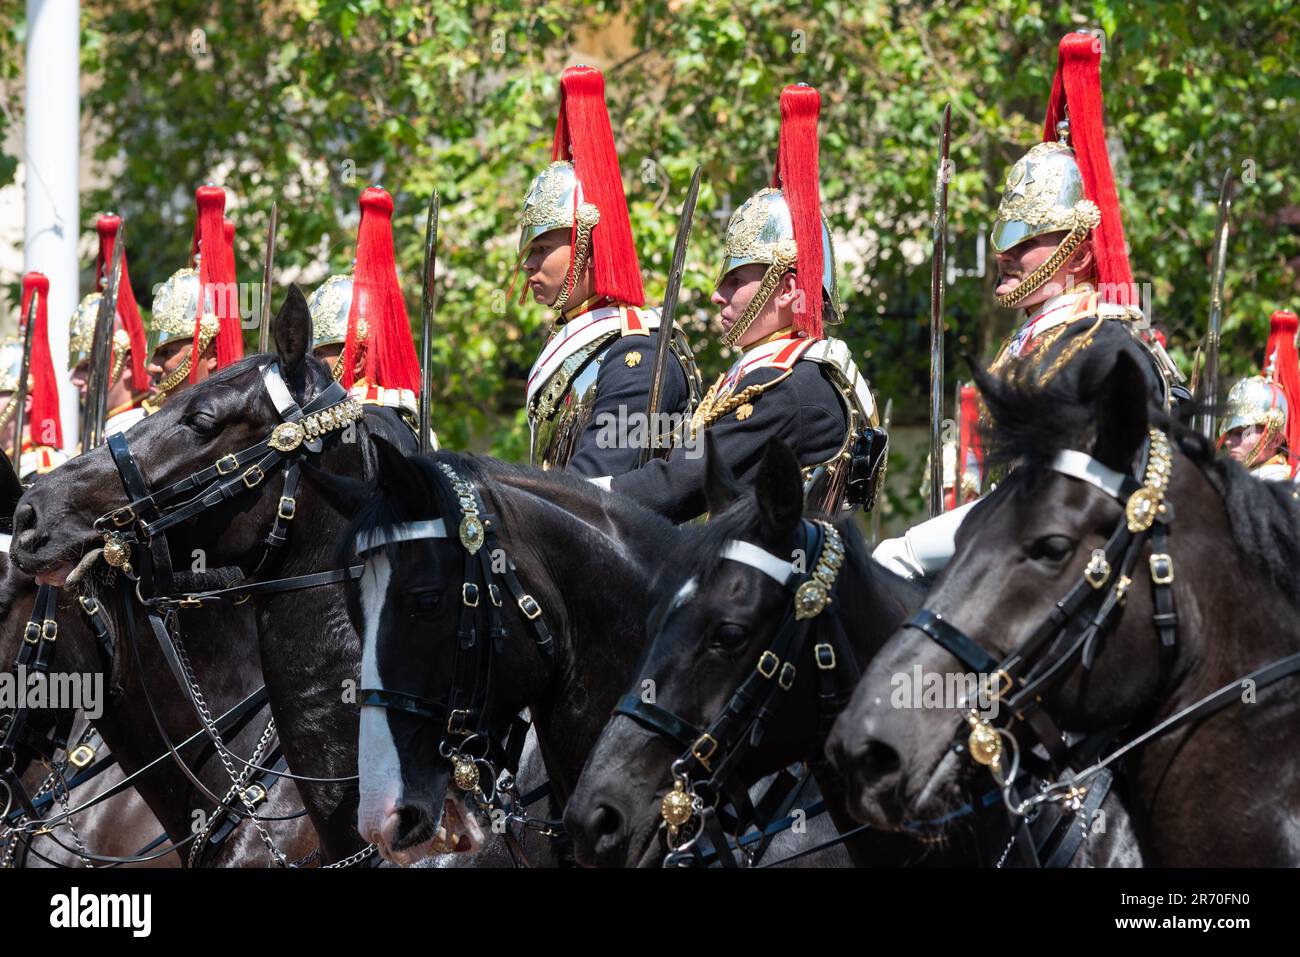 Colonel's review of Trooping the Colour, final evaluation of the military parade before the full event takes place next week. Blues & Royals Stock Photo